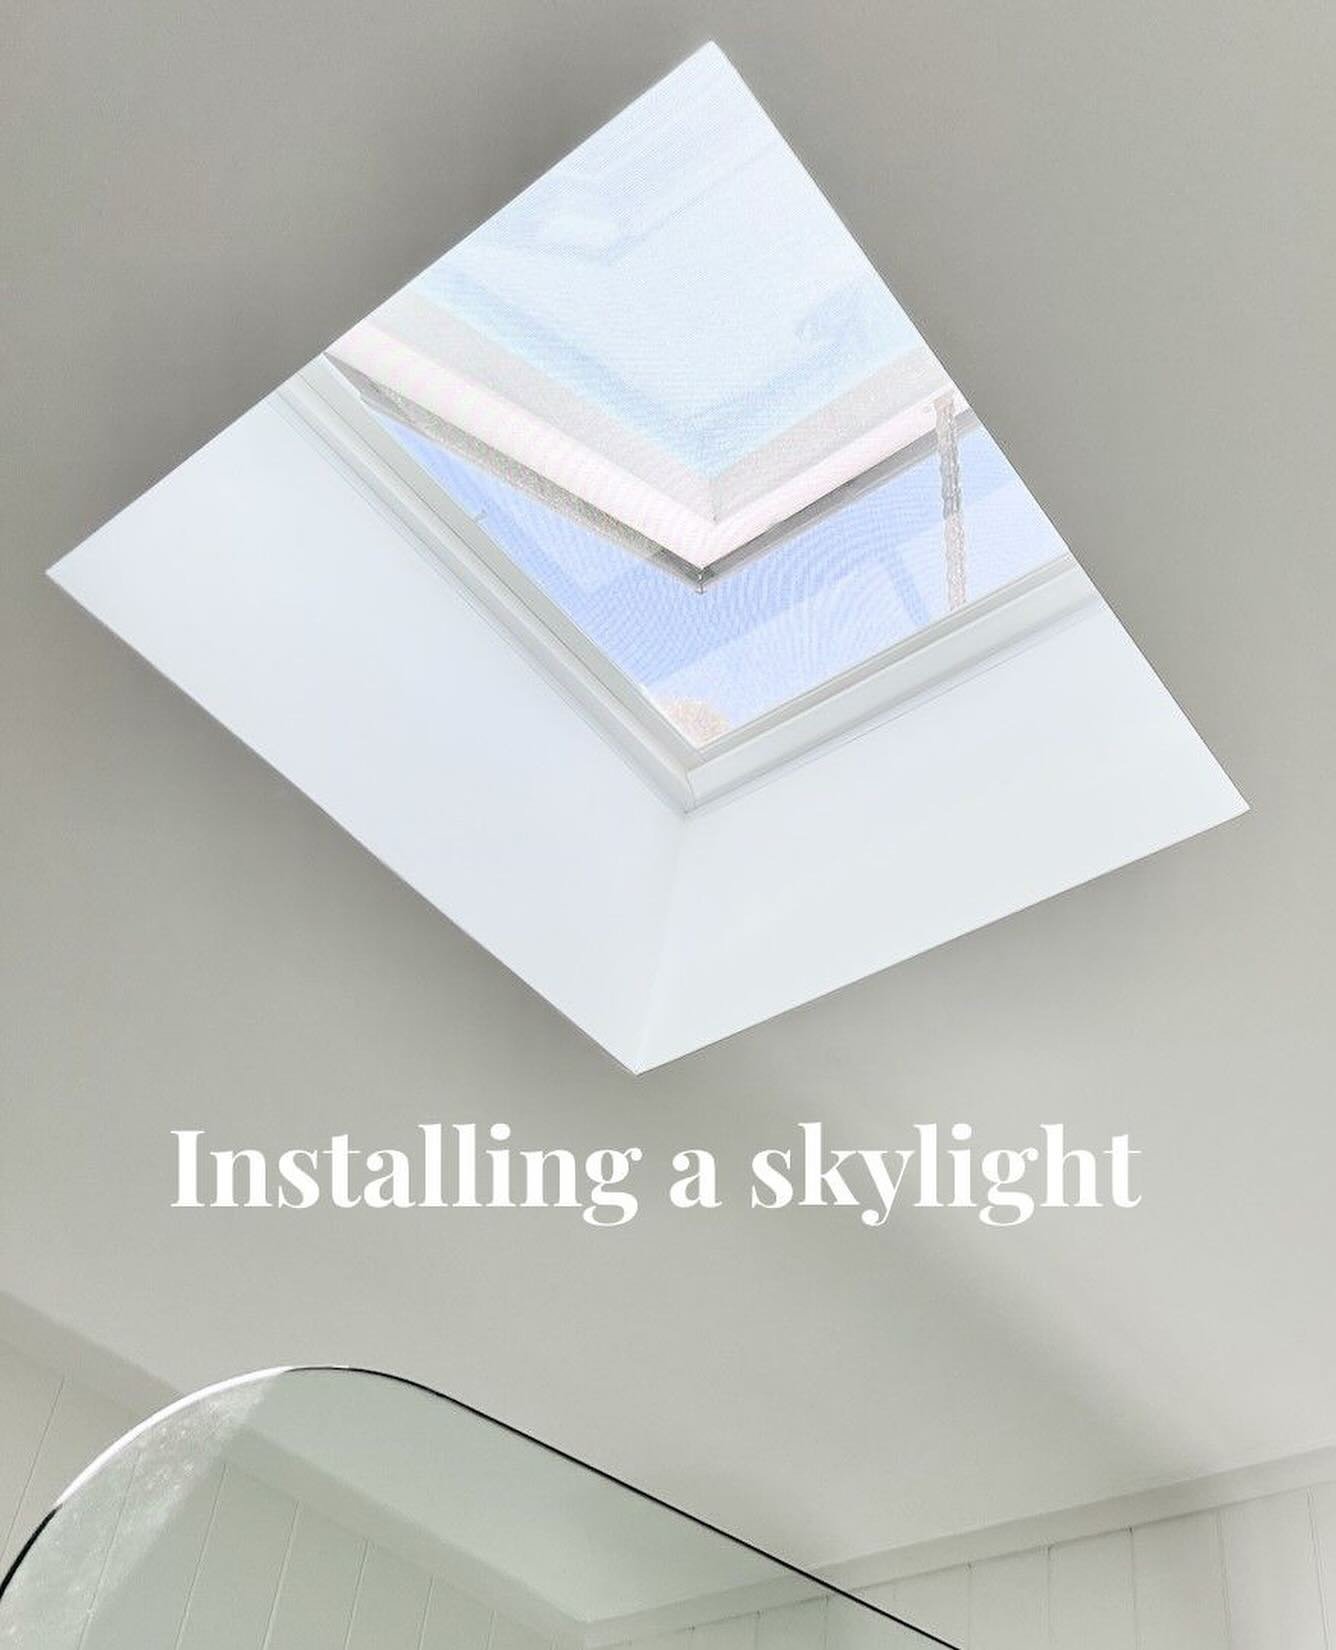 ⁠Including a skylight in my bathroom reno was essential. The room is now bright and airy by day and I can see the stars while showing at night. It also channels the sounds of the nearby South Pacific Ocean.⁠
I used a 665mm-square flat roof open @velu